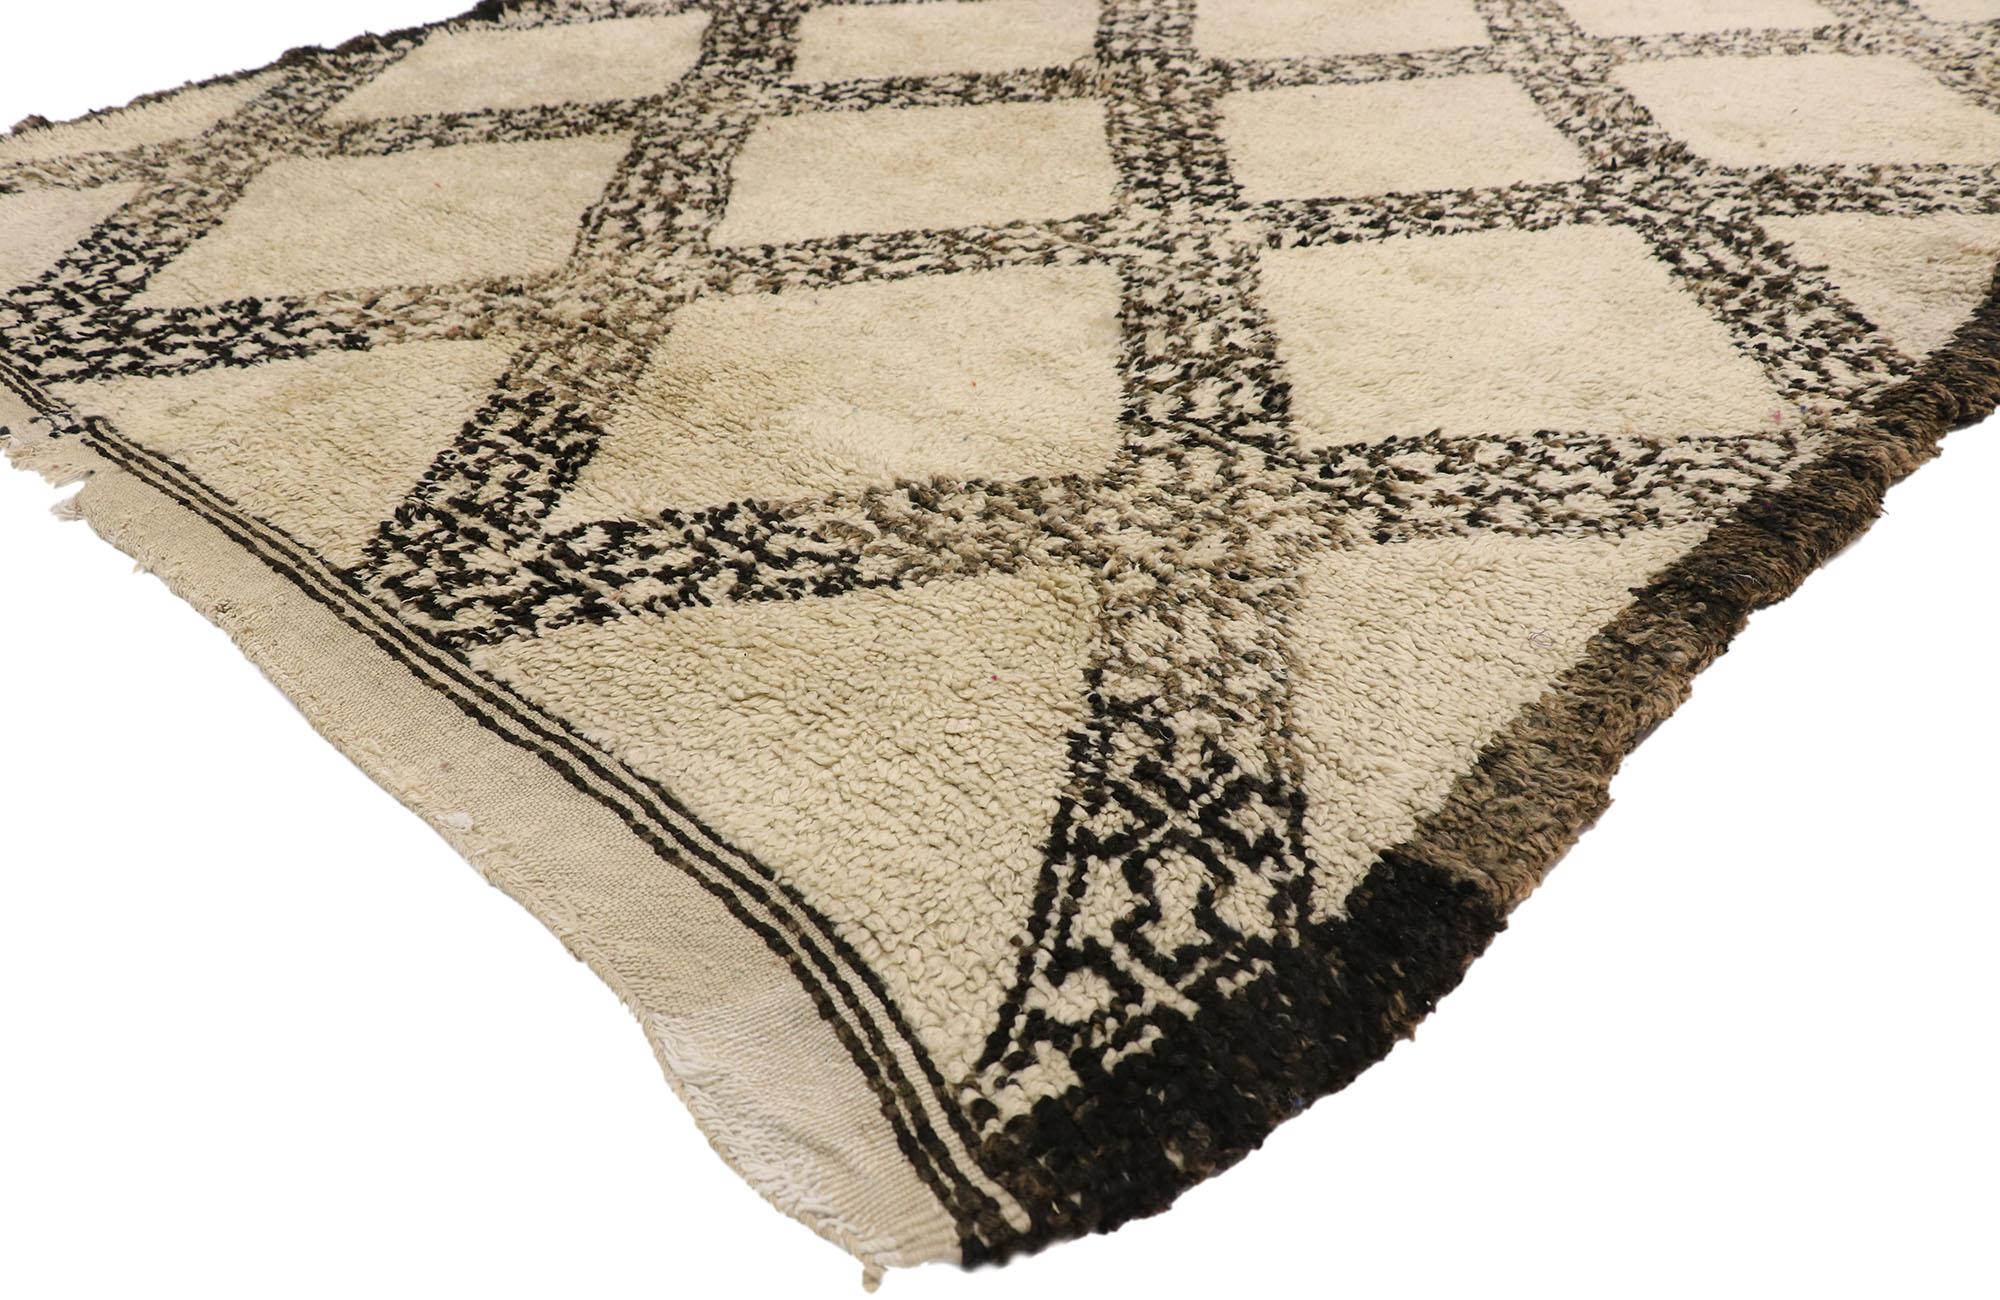 20904 vintage Beni Ouarain Moroccan rug with Mid-Century Modern style and Hygge vibes. This hand knotted wool vintage Beni Ourain Moroccan rug features five offset vertical columns of stacked lozenges spread across an abrashed beige field. It is